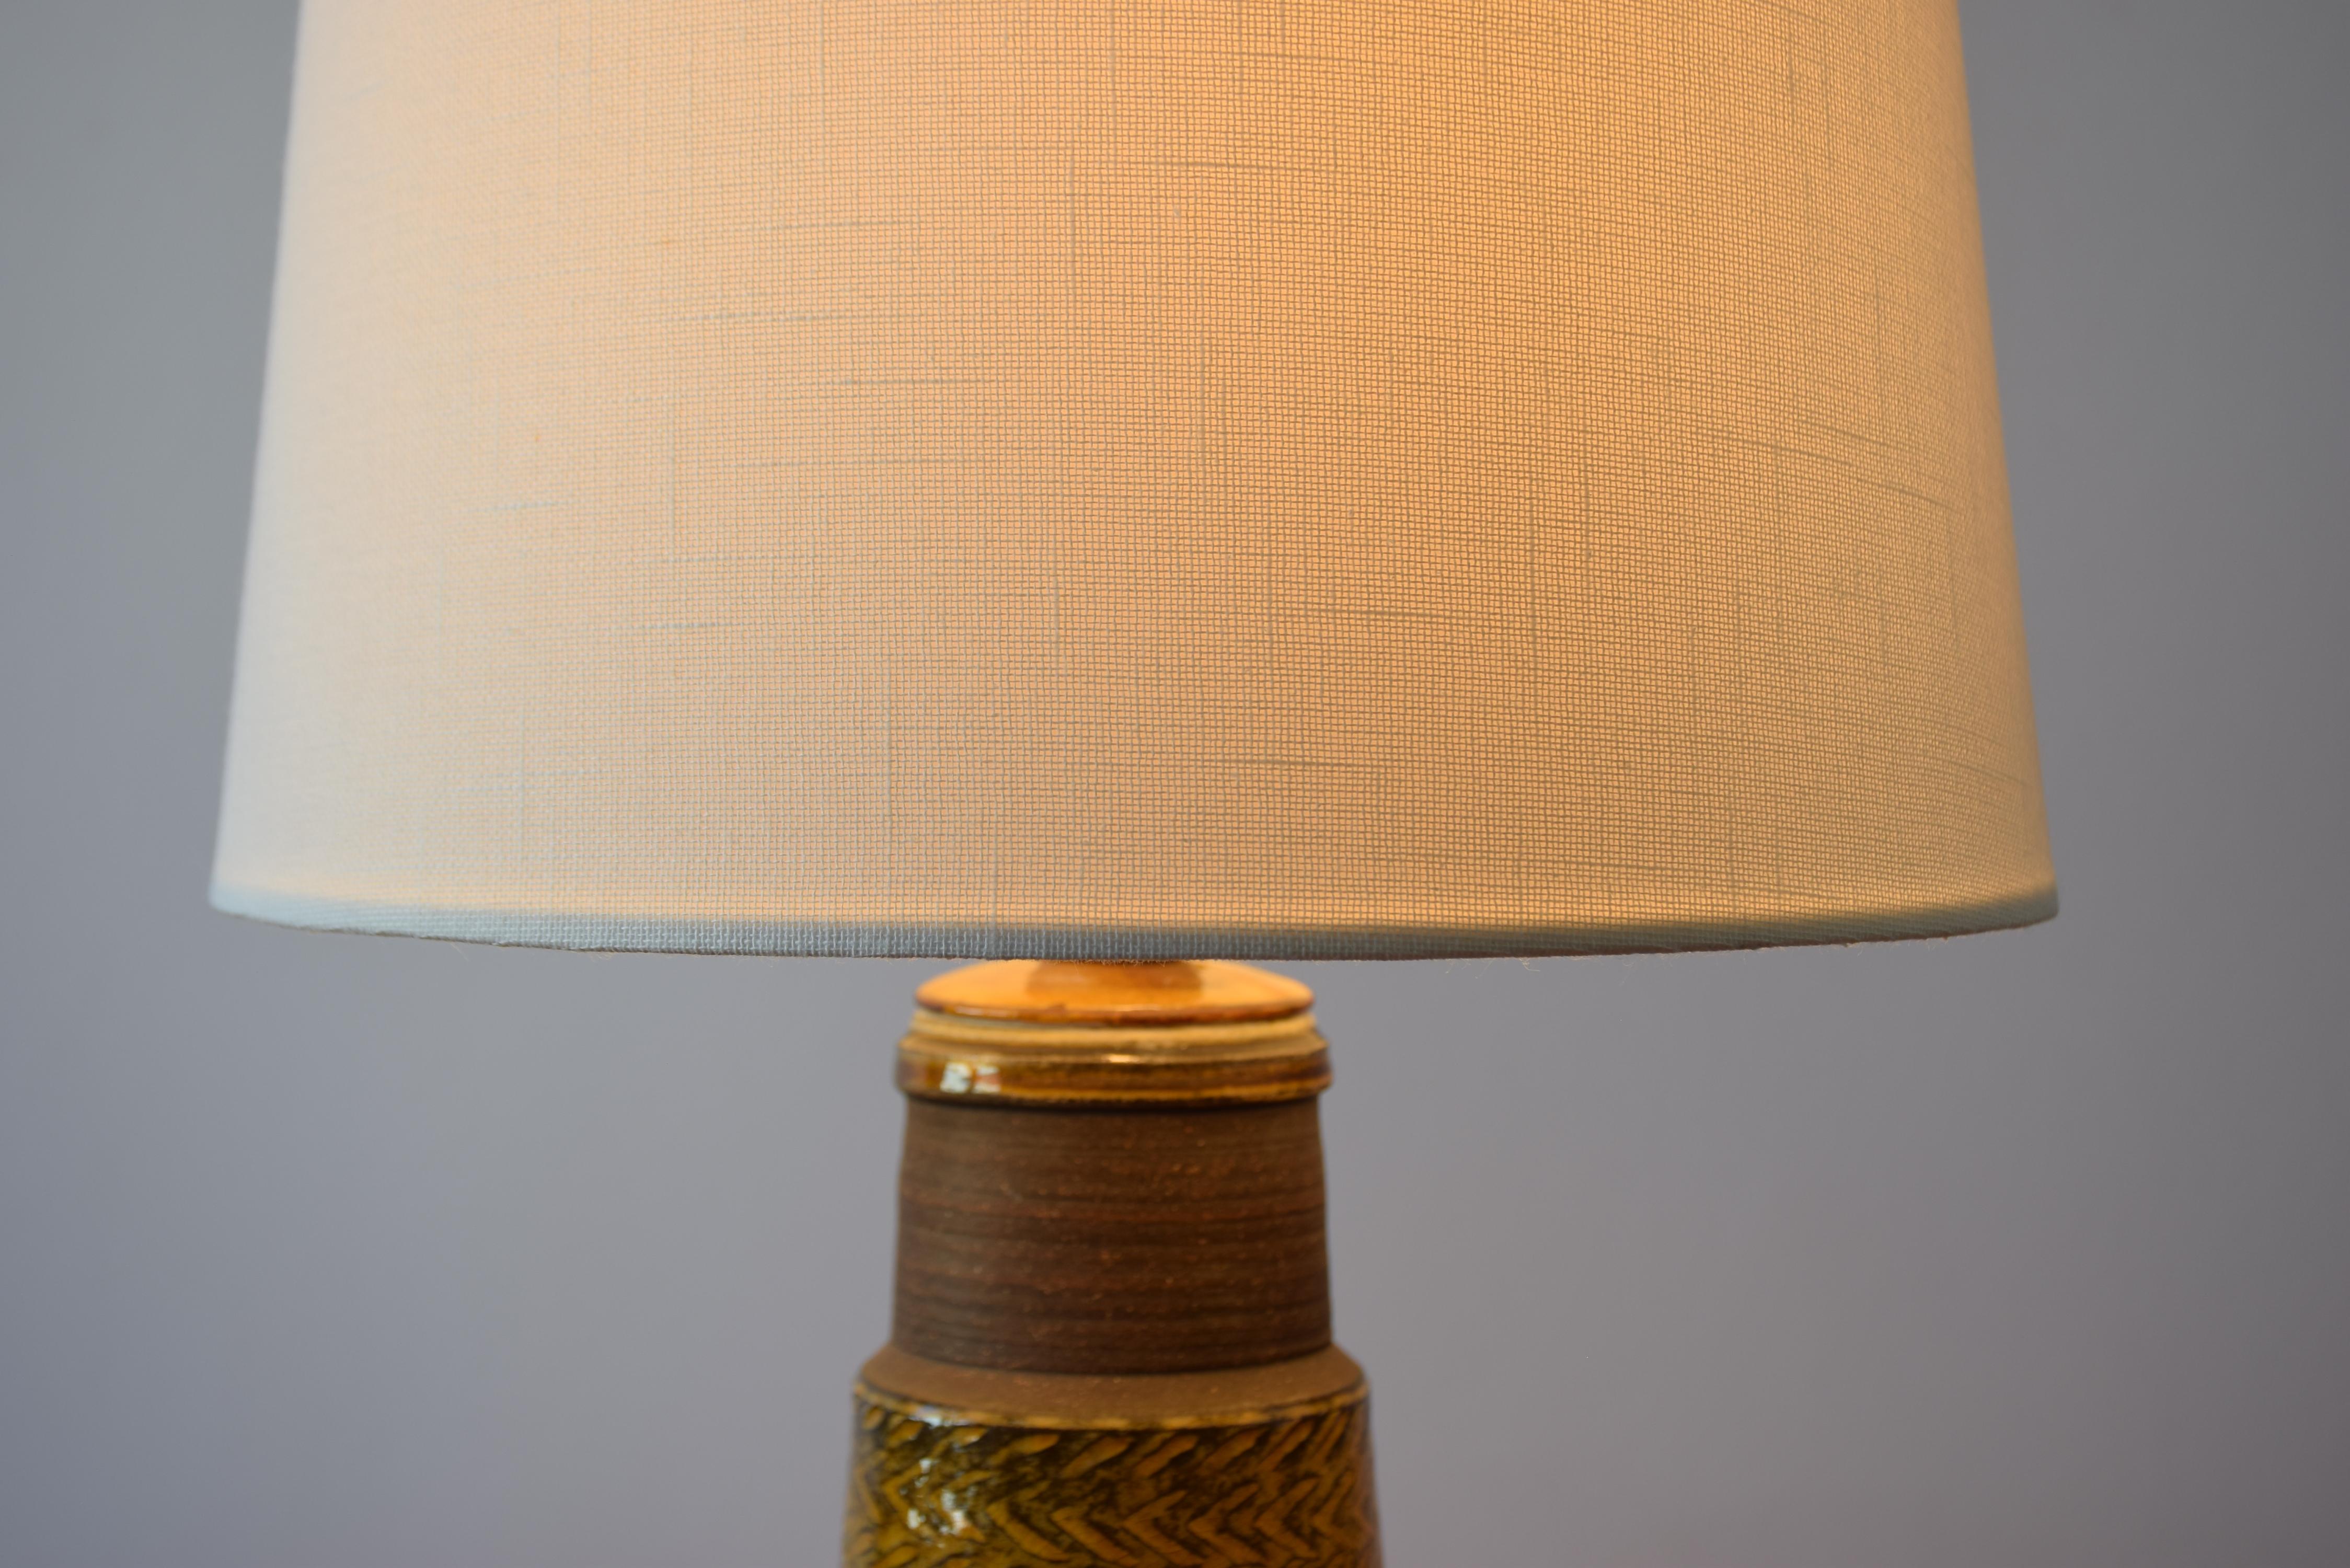 Danish Kähler HAK Table Lamp Brown with Amber Yellow Glaze, Midcentury, 1960s For Sale 4